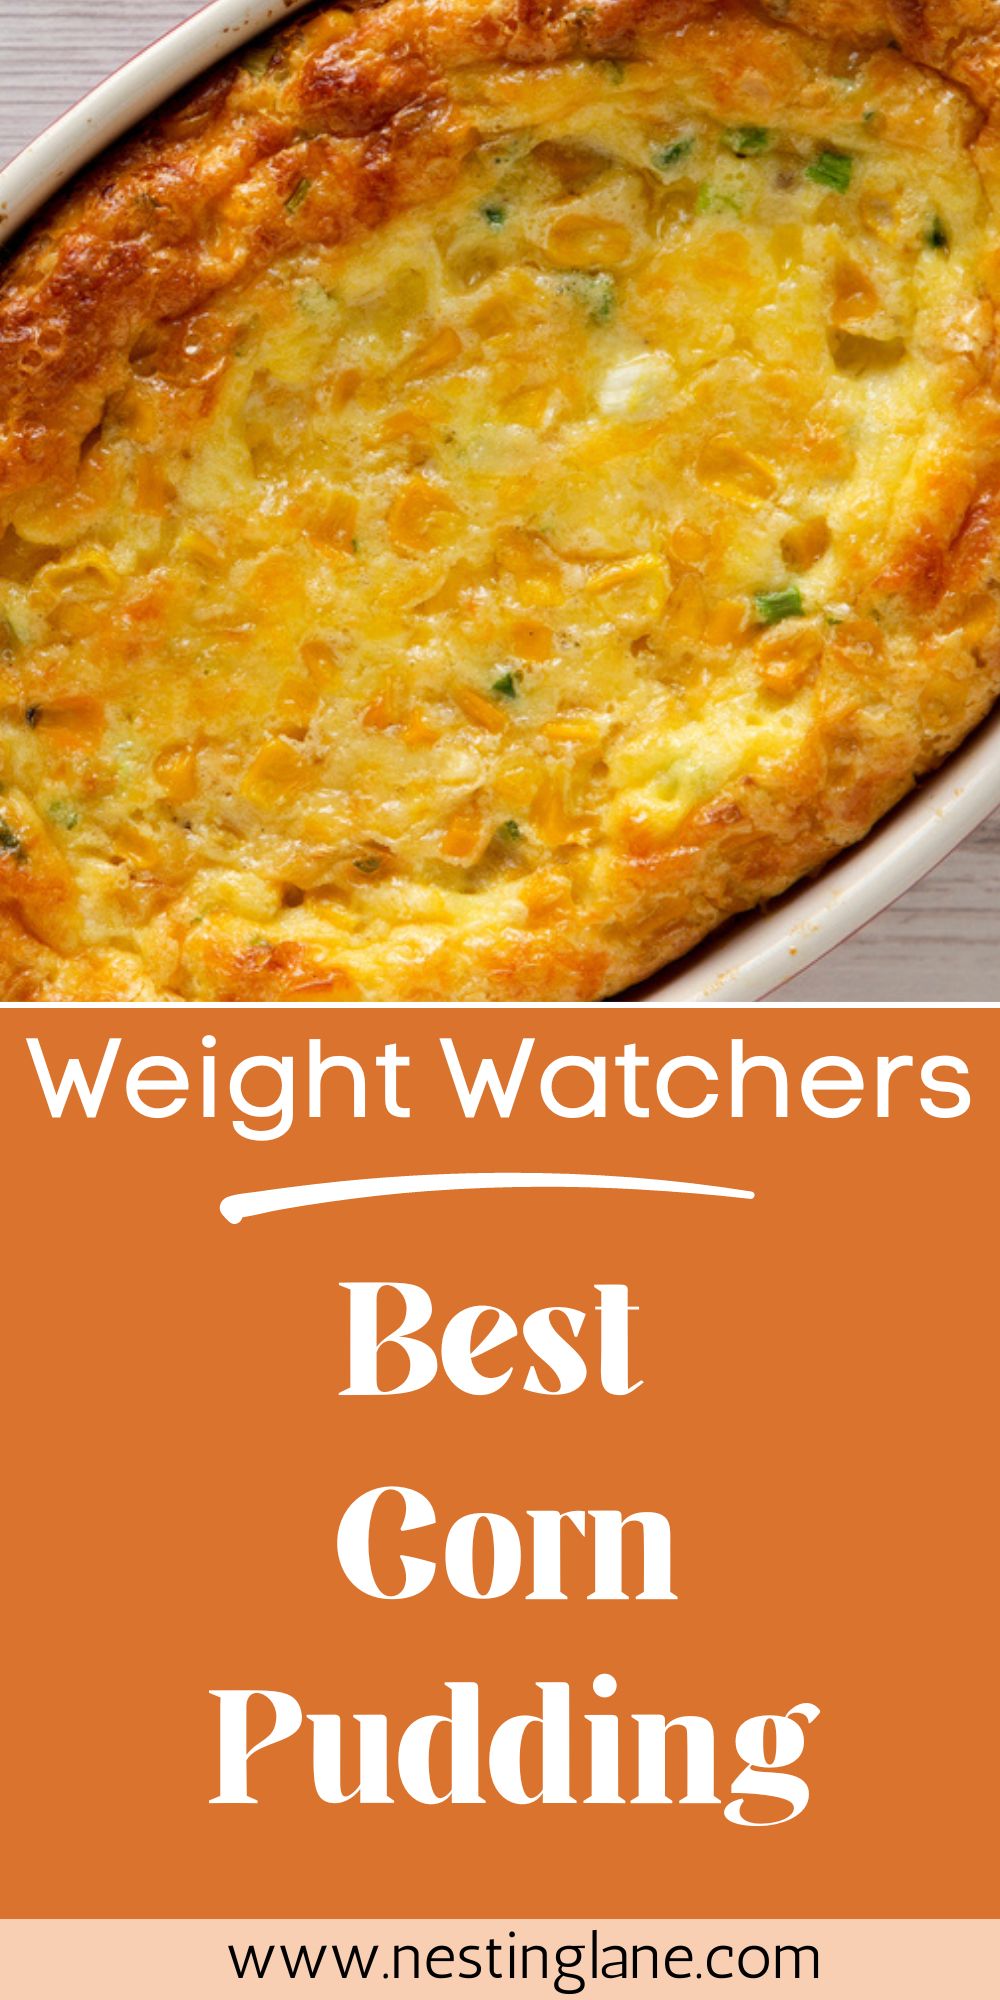 Graphic for Pinterest of Best Weight Watchers Corn Pudding Recipe.